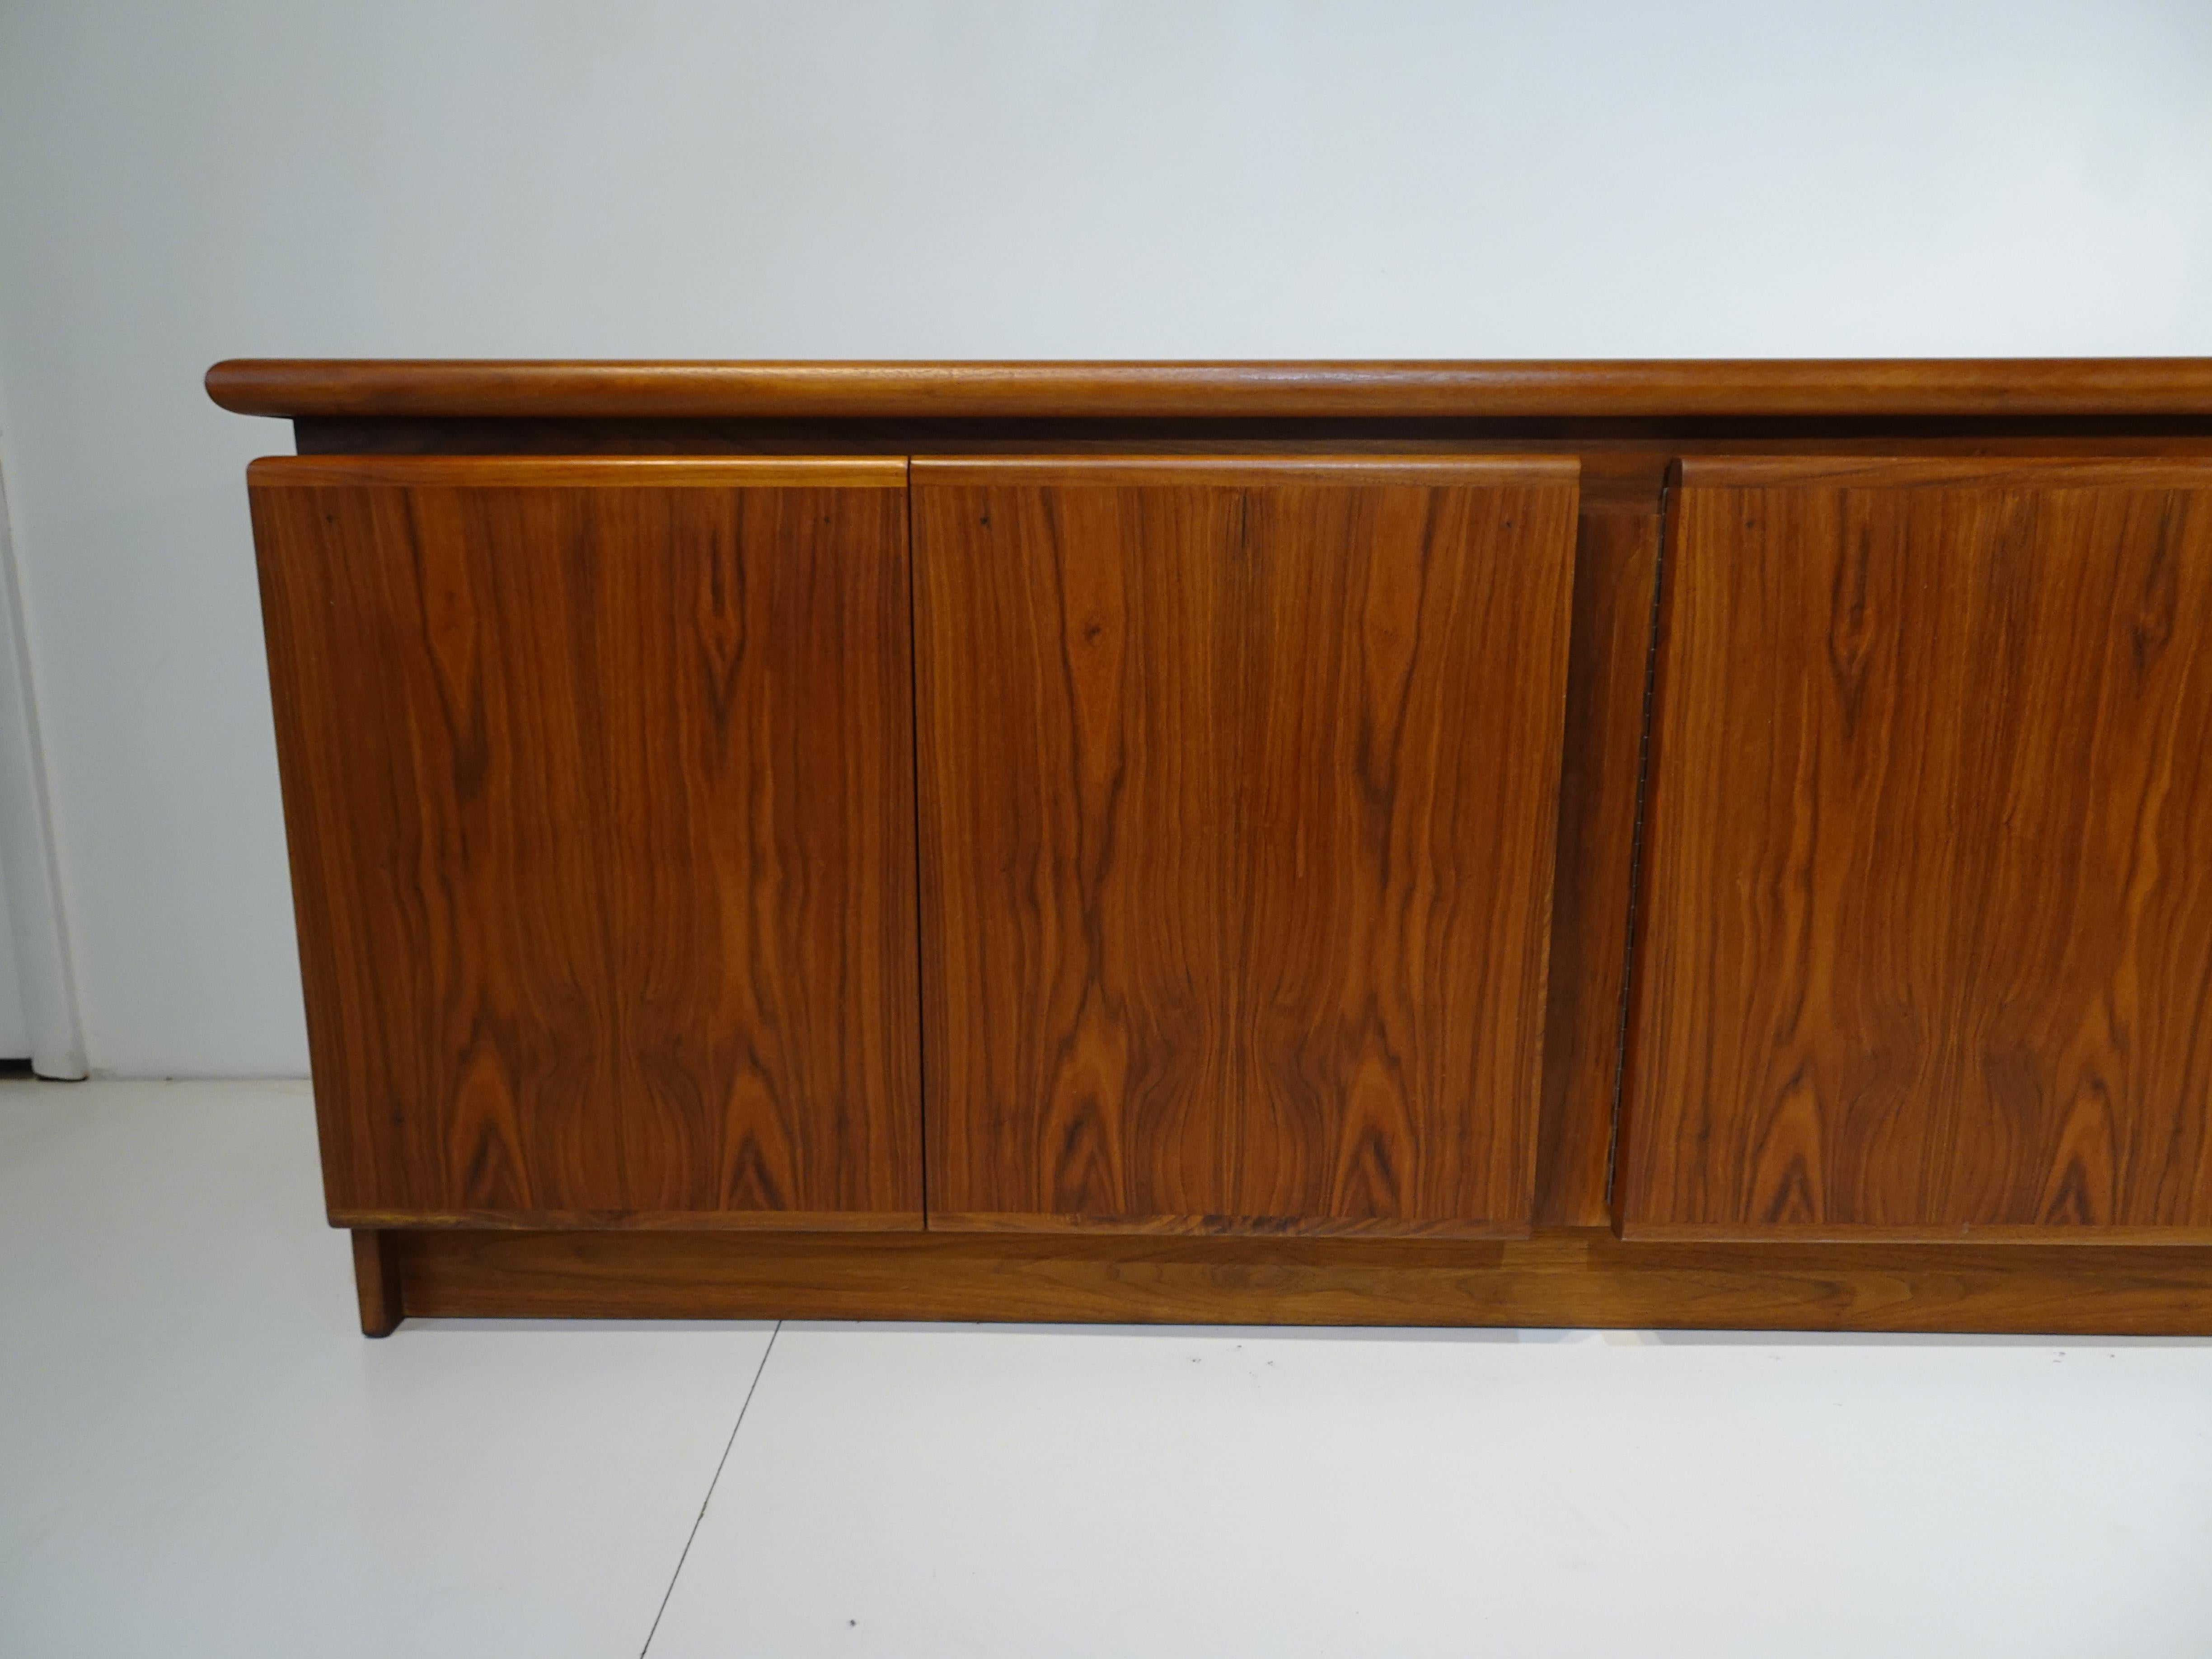 20th Century Danish Walnut Credenza / Sideboard in the Style of Poul Hundevad